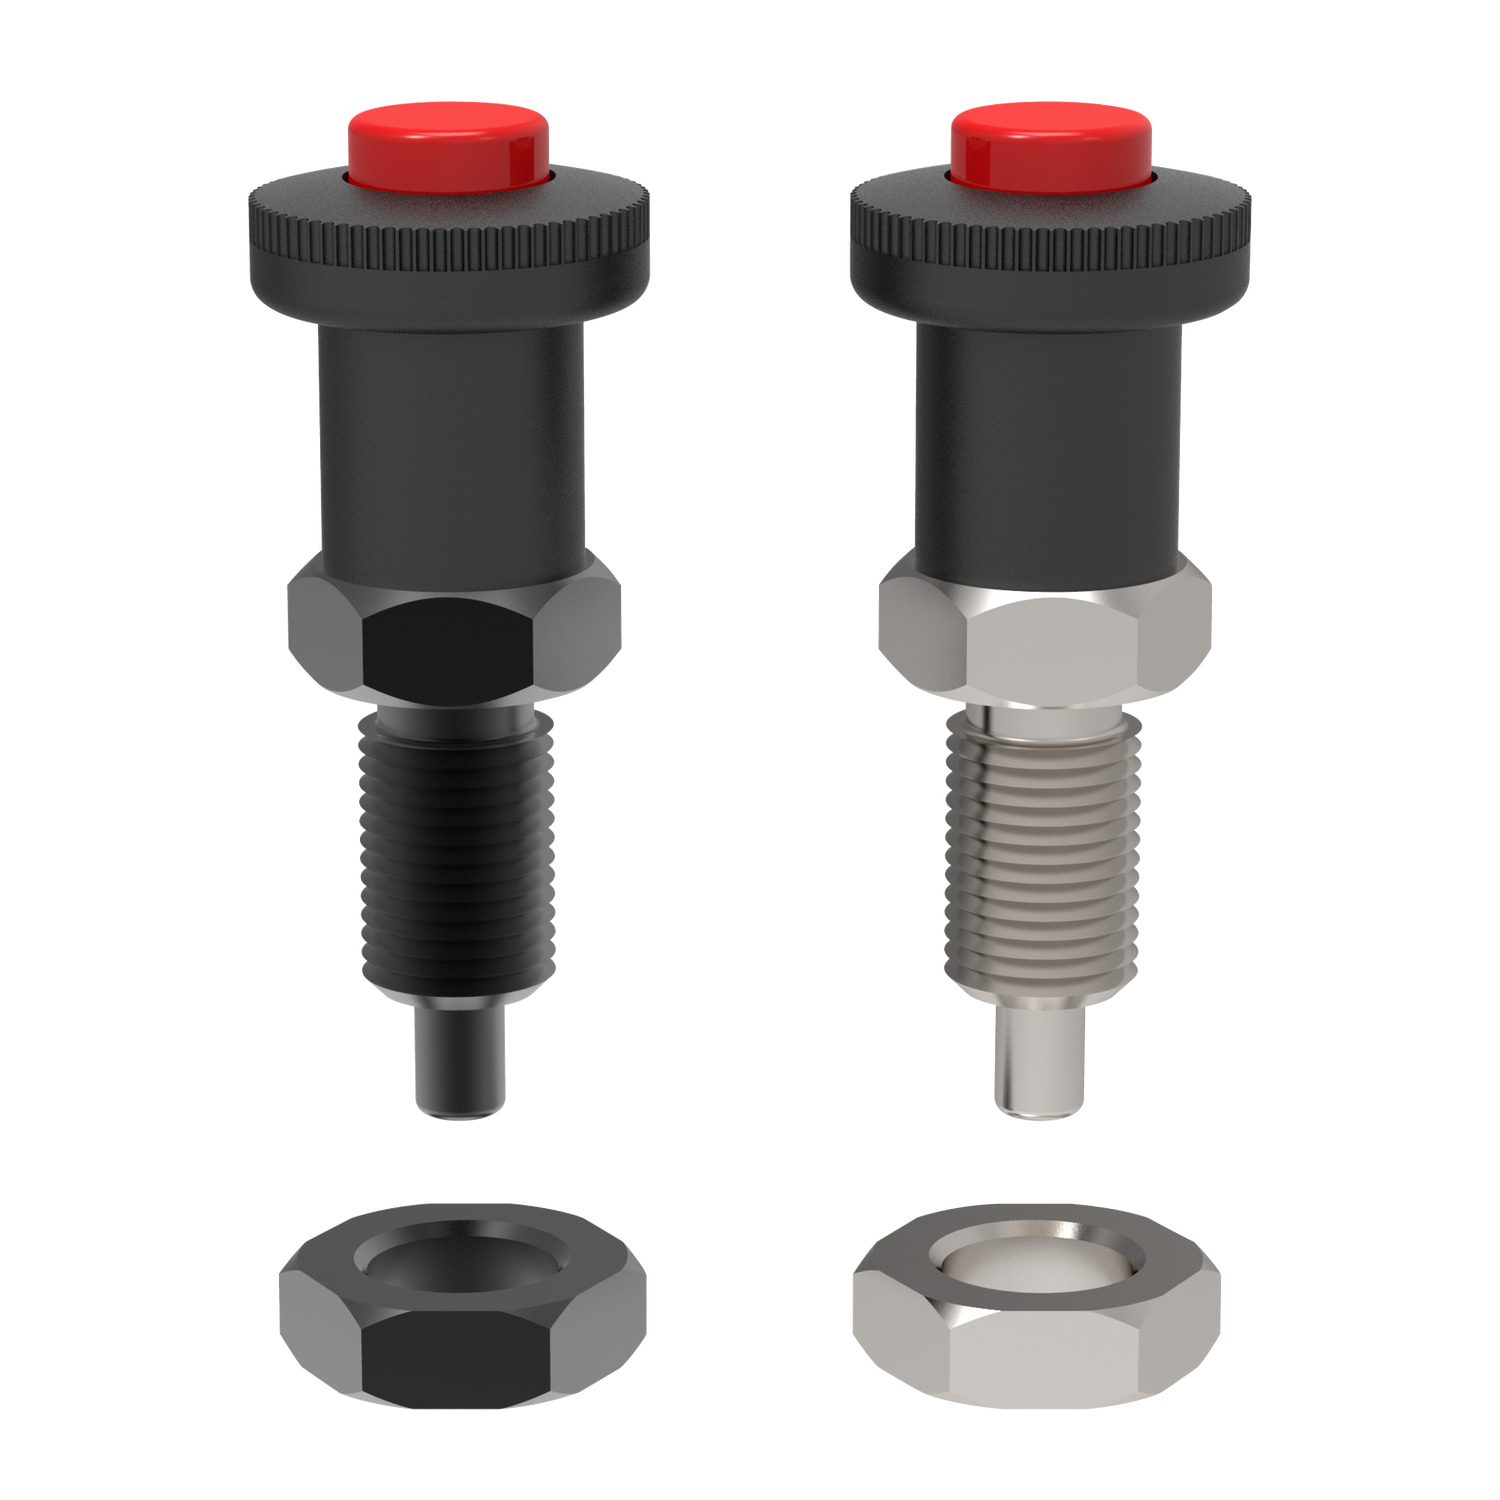 Index Plungers - Pull Grip Pull grip index plunger with release lock. Press red button and hold whilst pulling knob to release pin. Temperature range from -30°C to +80°C.